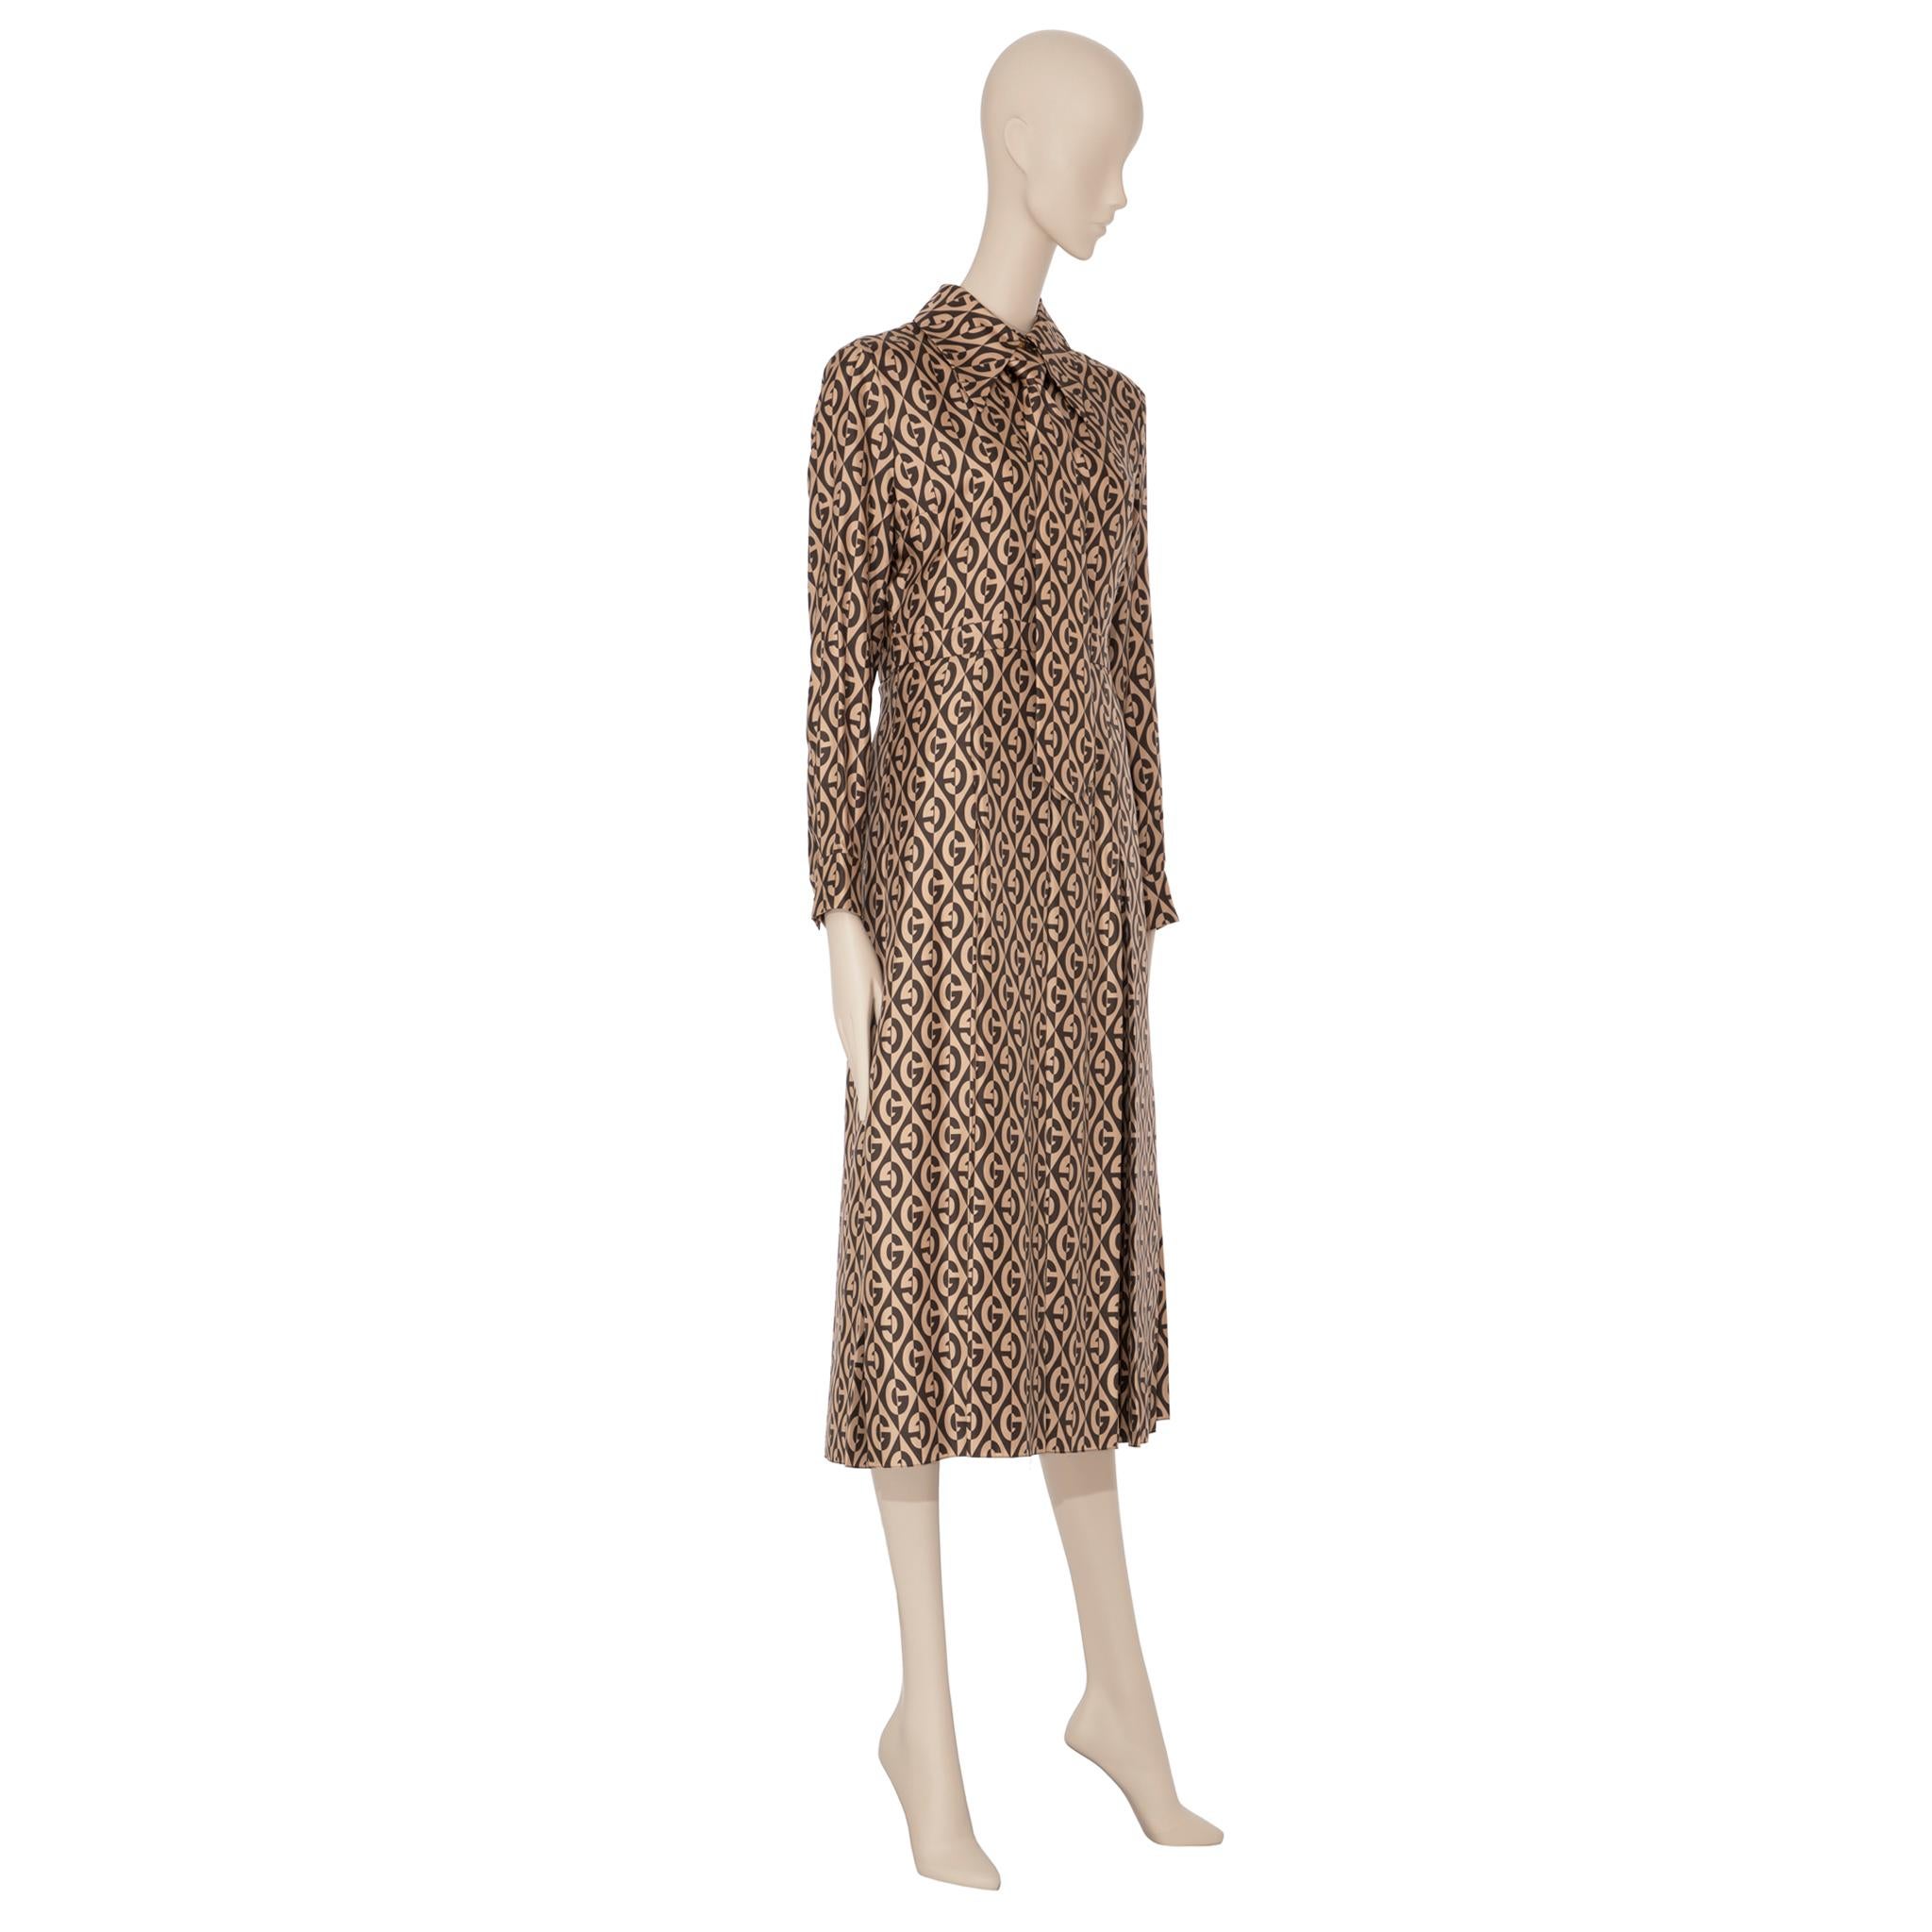 Brand:

Gucci

Product:

G Rombus Print Dress Silk

Size:

40 It

Colour:

Brown & Ivory

Material

100% Silk

Condition:

Pristine; Never Worn

Details

- Removable Tie

- 5 Front Button Closure

- Side Zip

- Pleated Skirt

- Long Sleeves

-